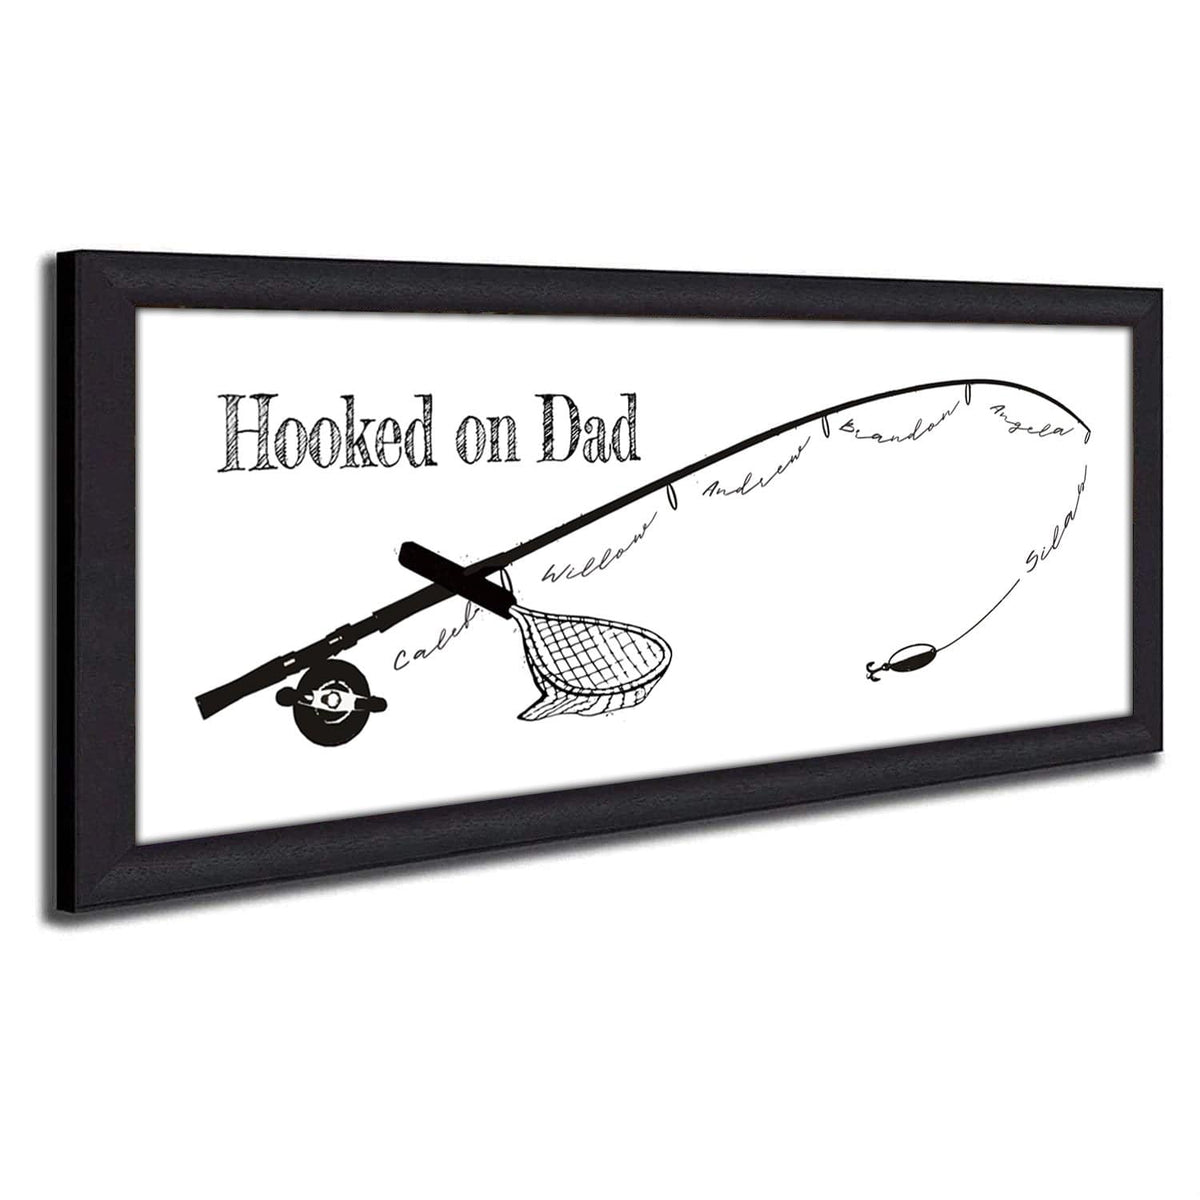 Framed Canvas Personalized gift for fisherman dad